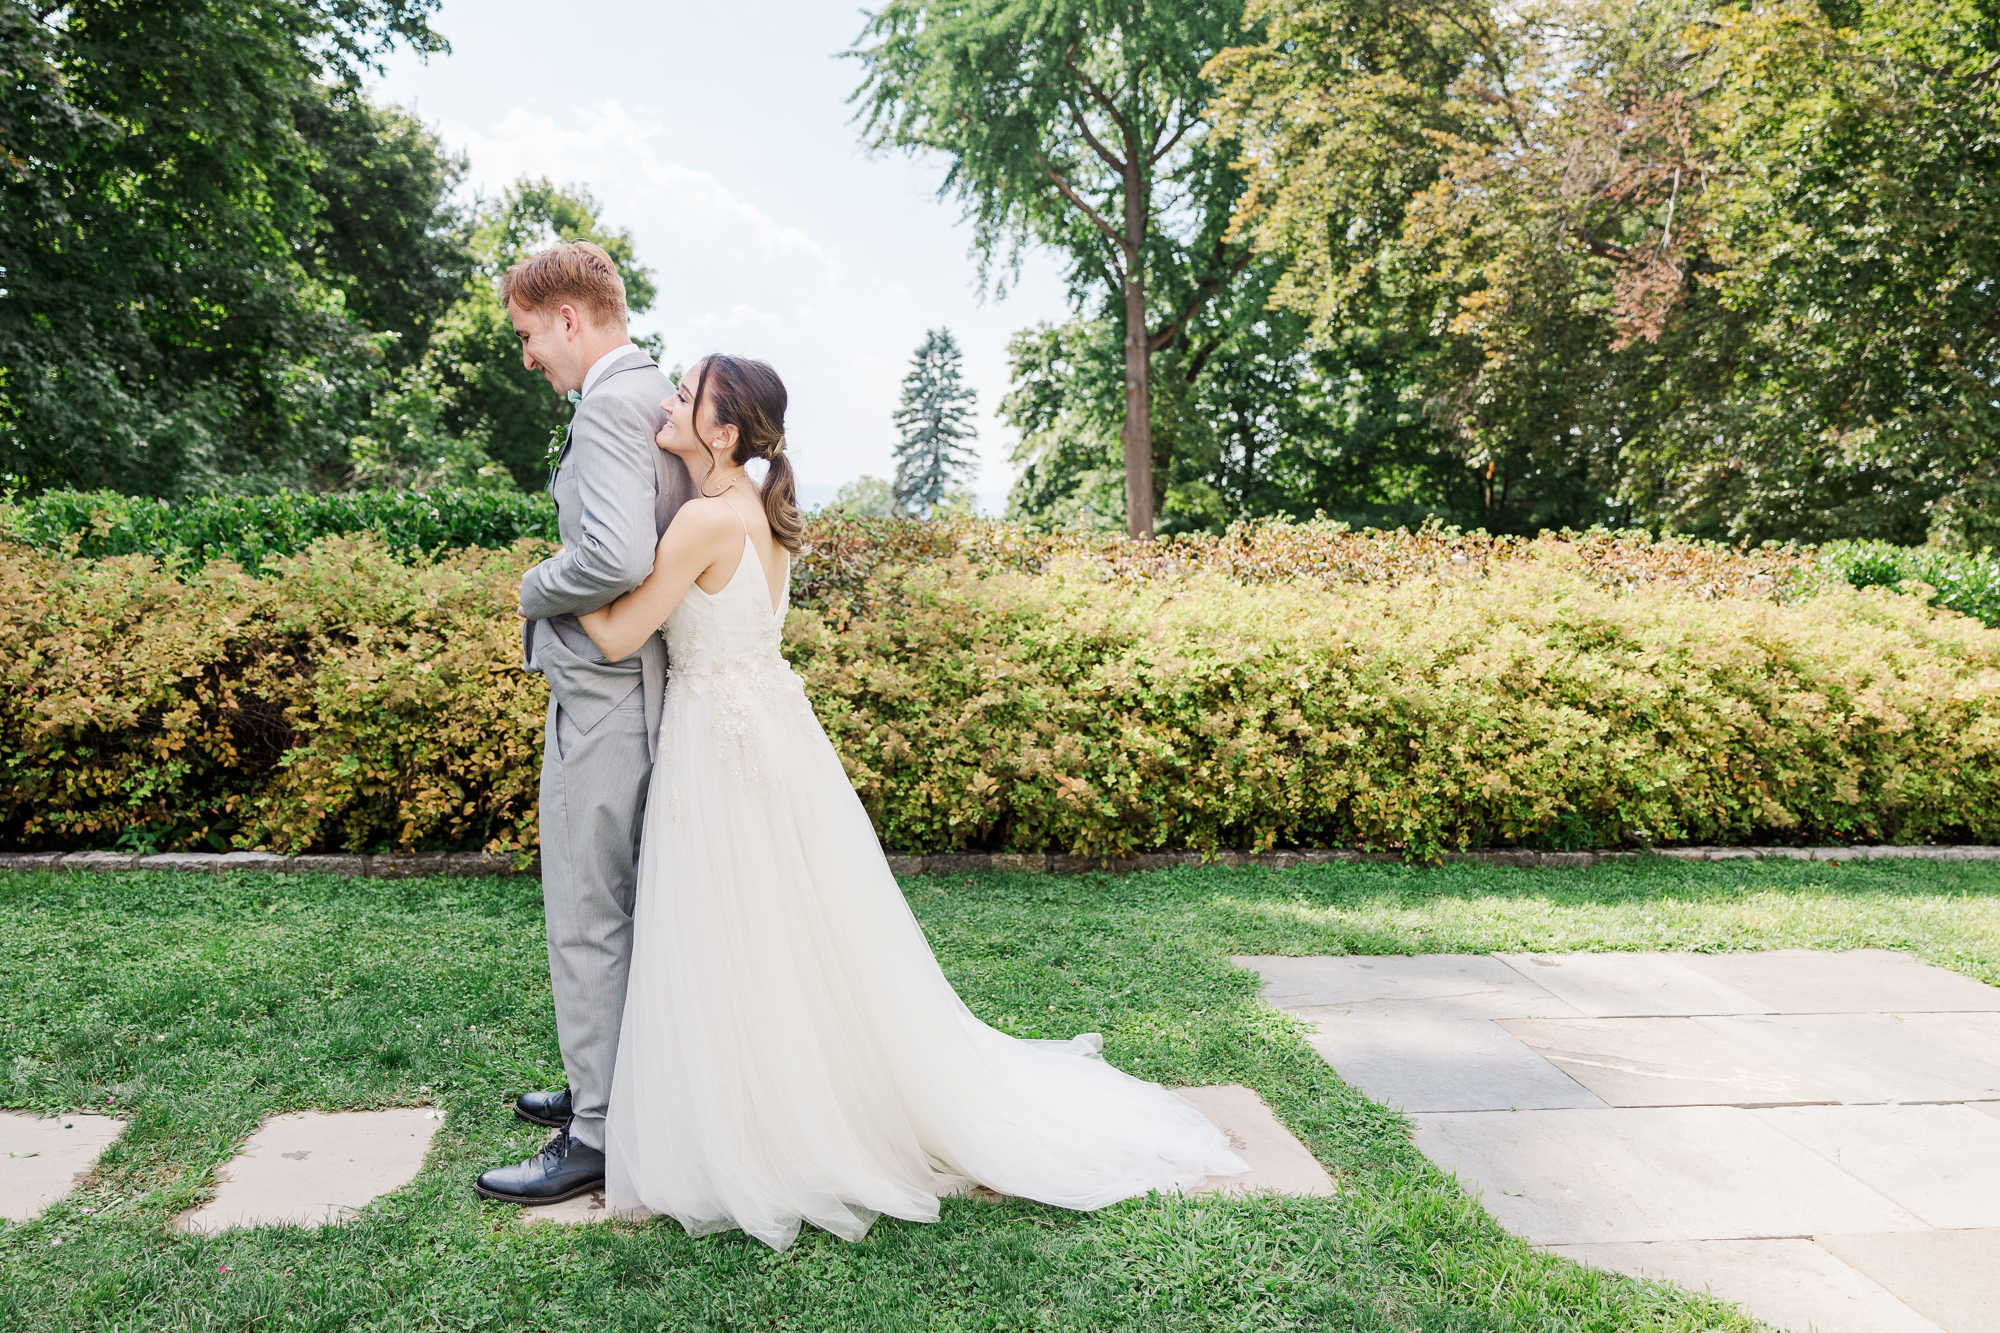 Joyous Wedding at Briarcliff Manor in Westchester County